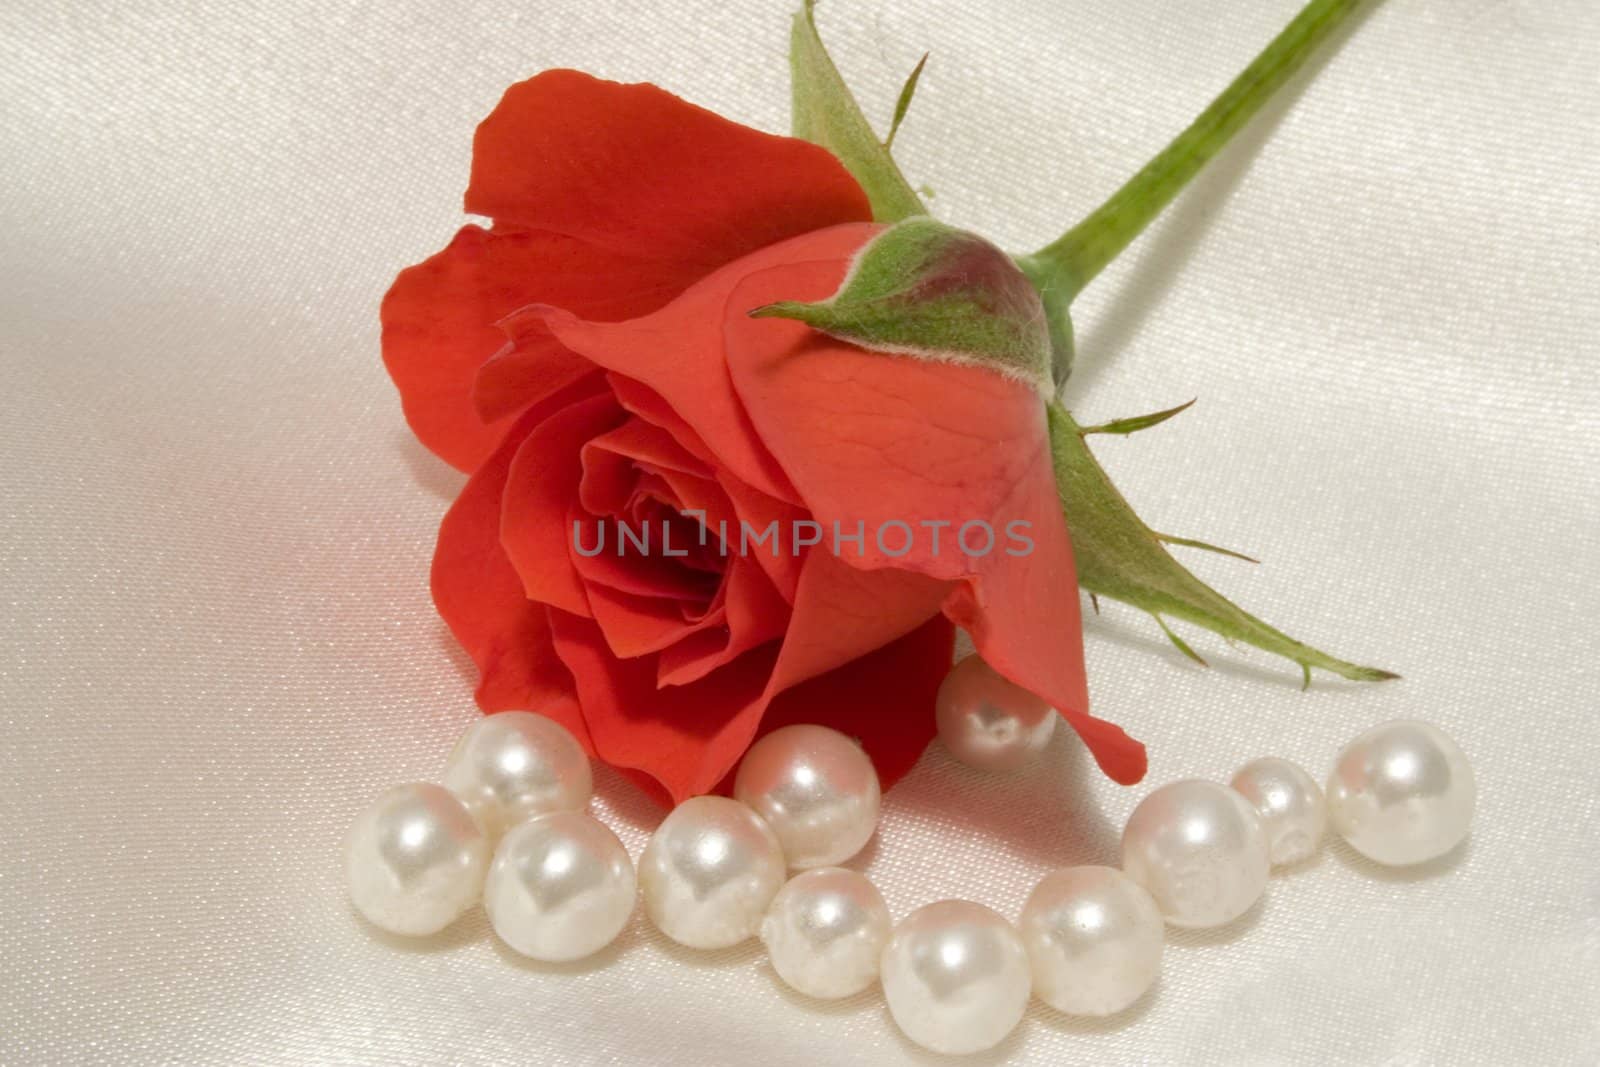 A macro of a tiny rosebud with scattered pearls, lying on white silk